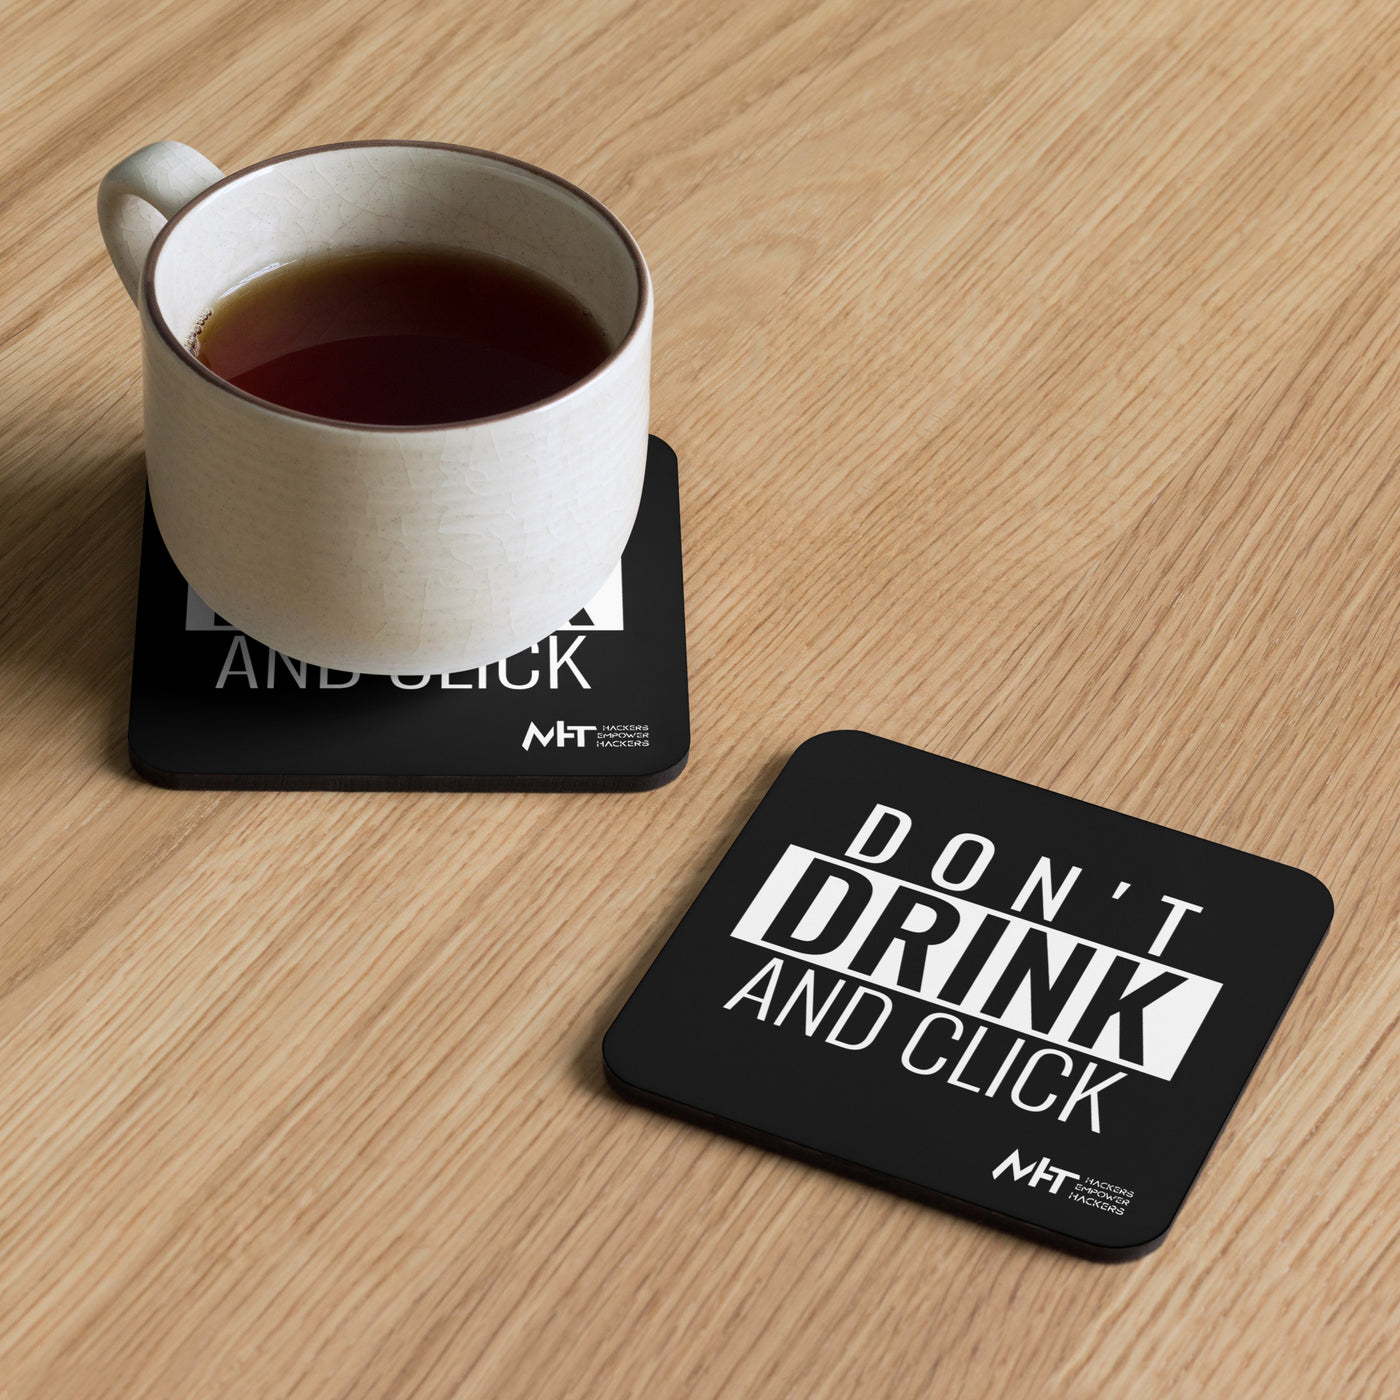 Don't drink and click - Cork-back coaster